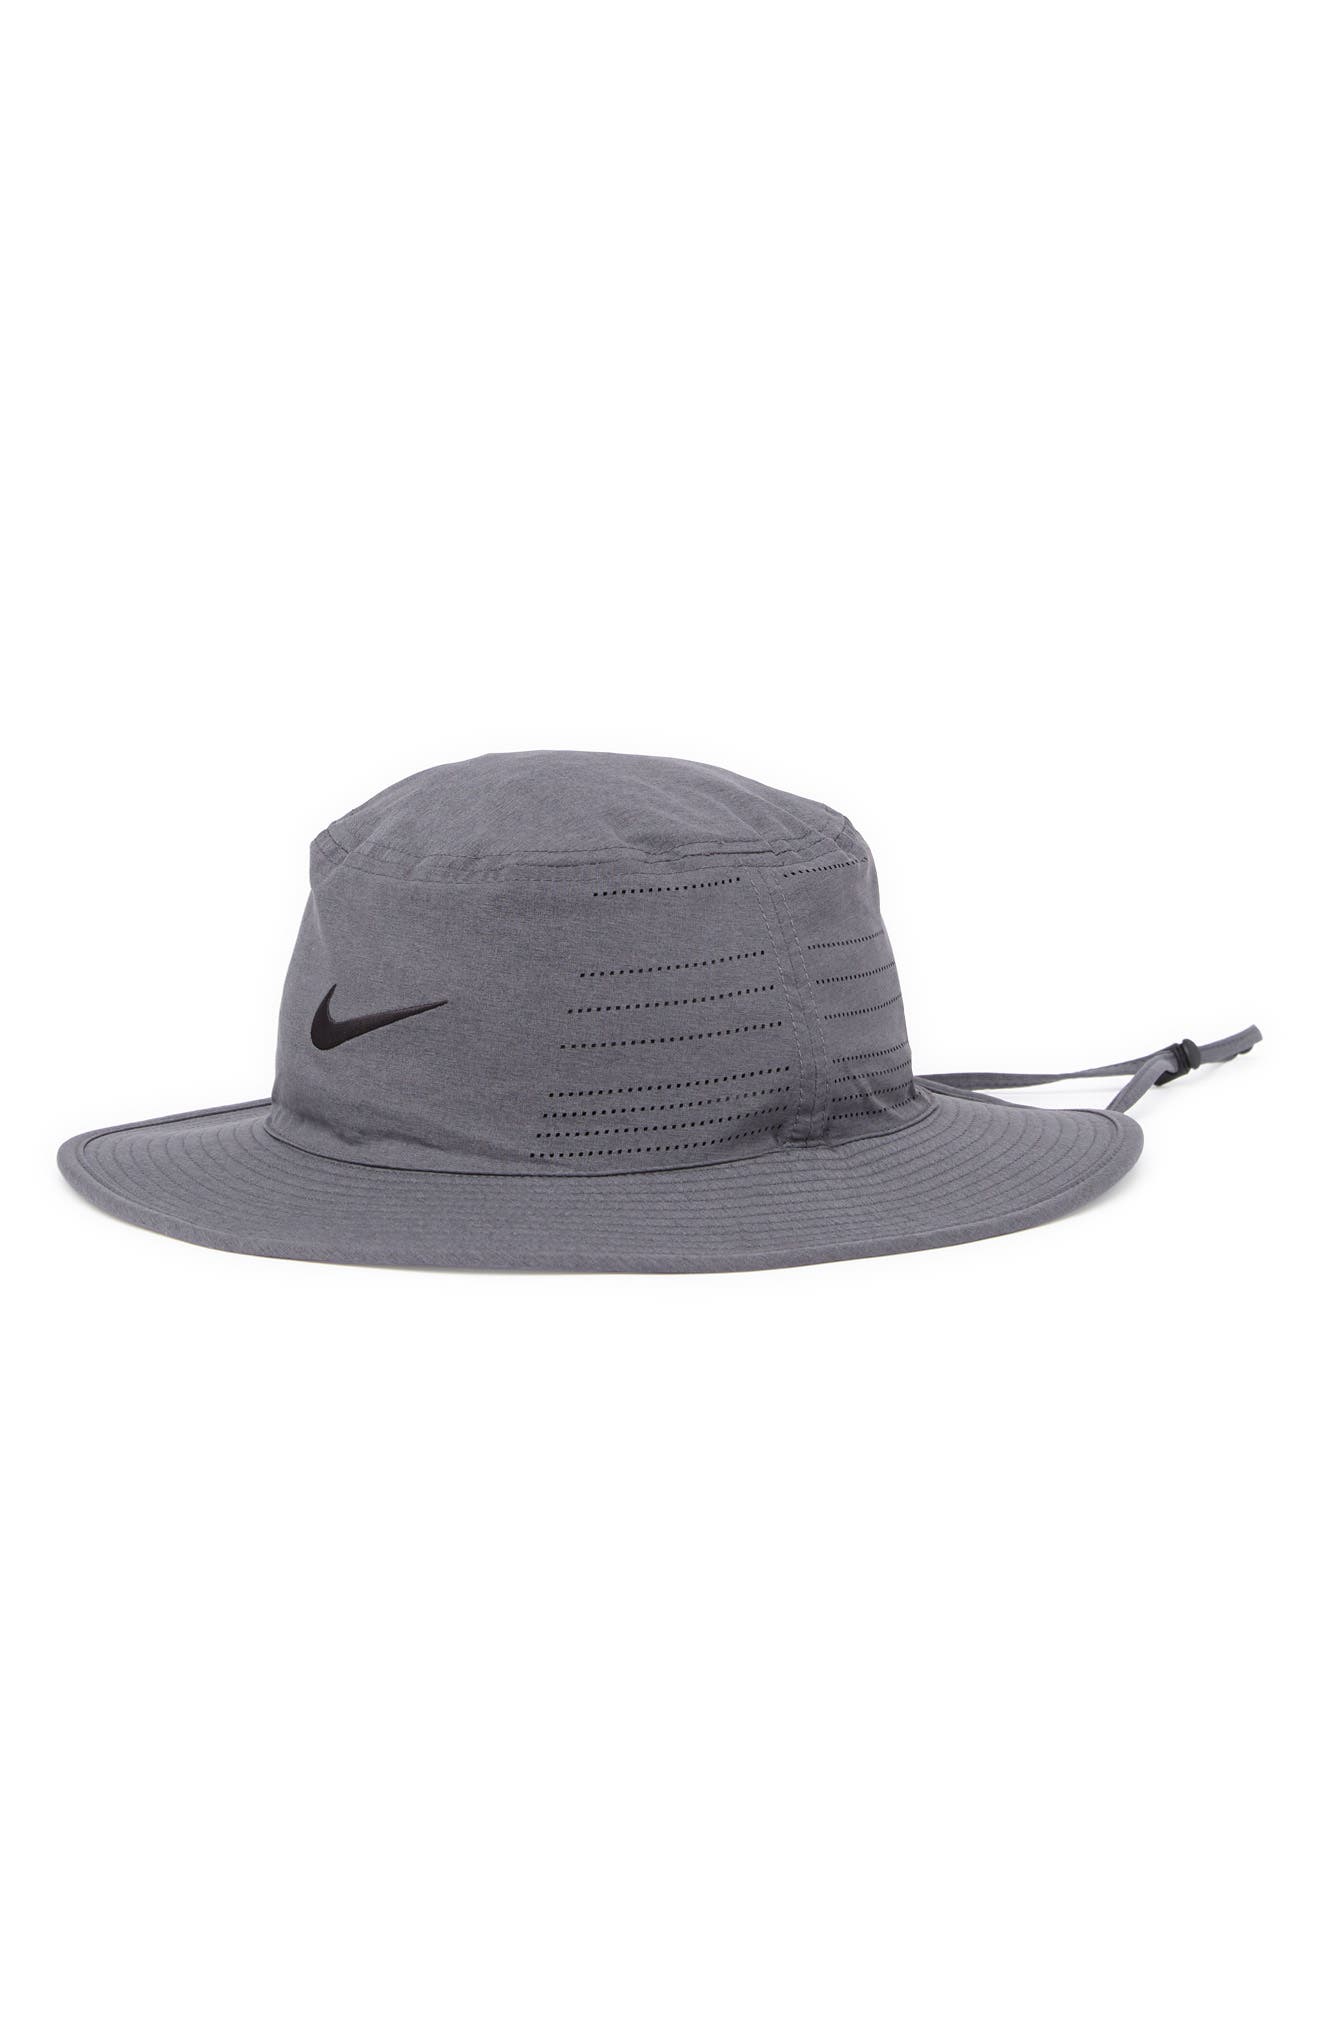 UPC 888408480170 product image for Nike Dry-FIT UV Bucket Cap in Charcoal/black at Nordstrom, Size Medium | upcitemdb.com